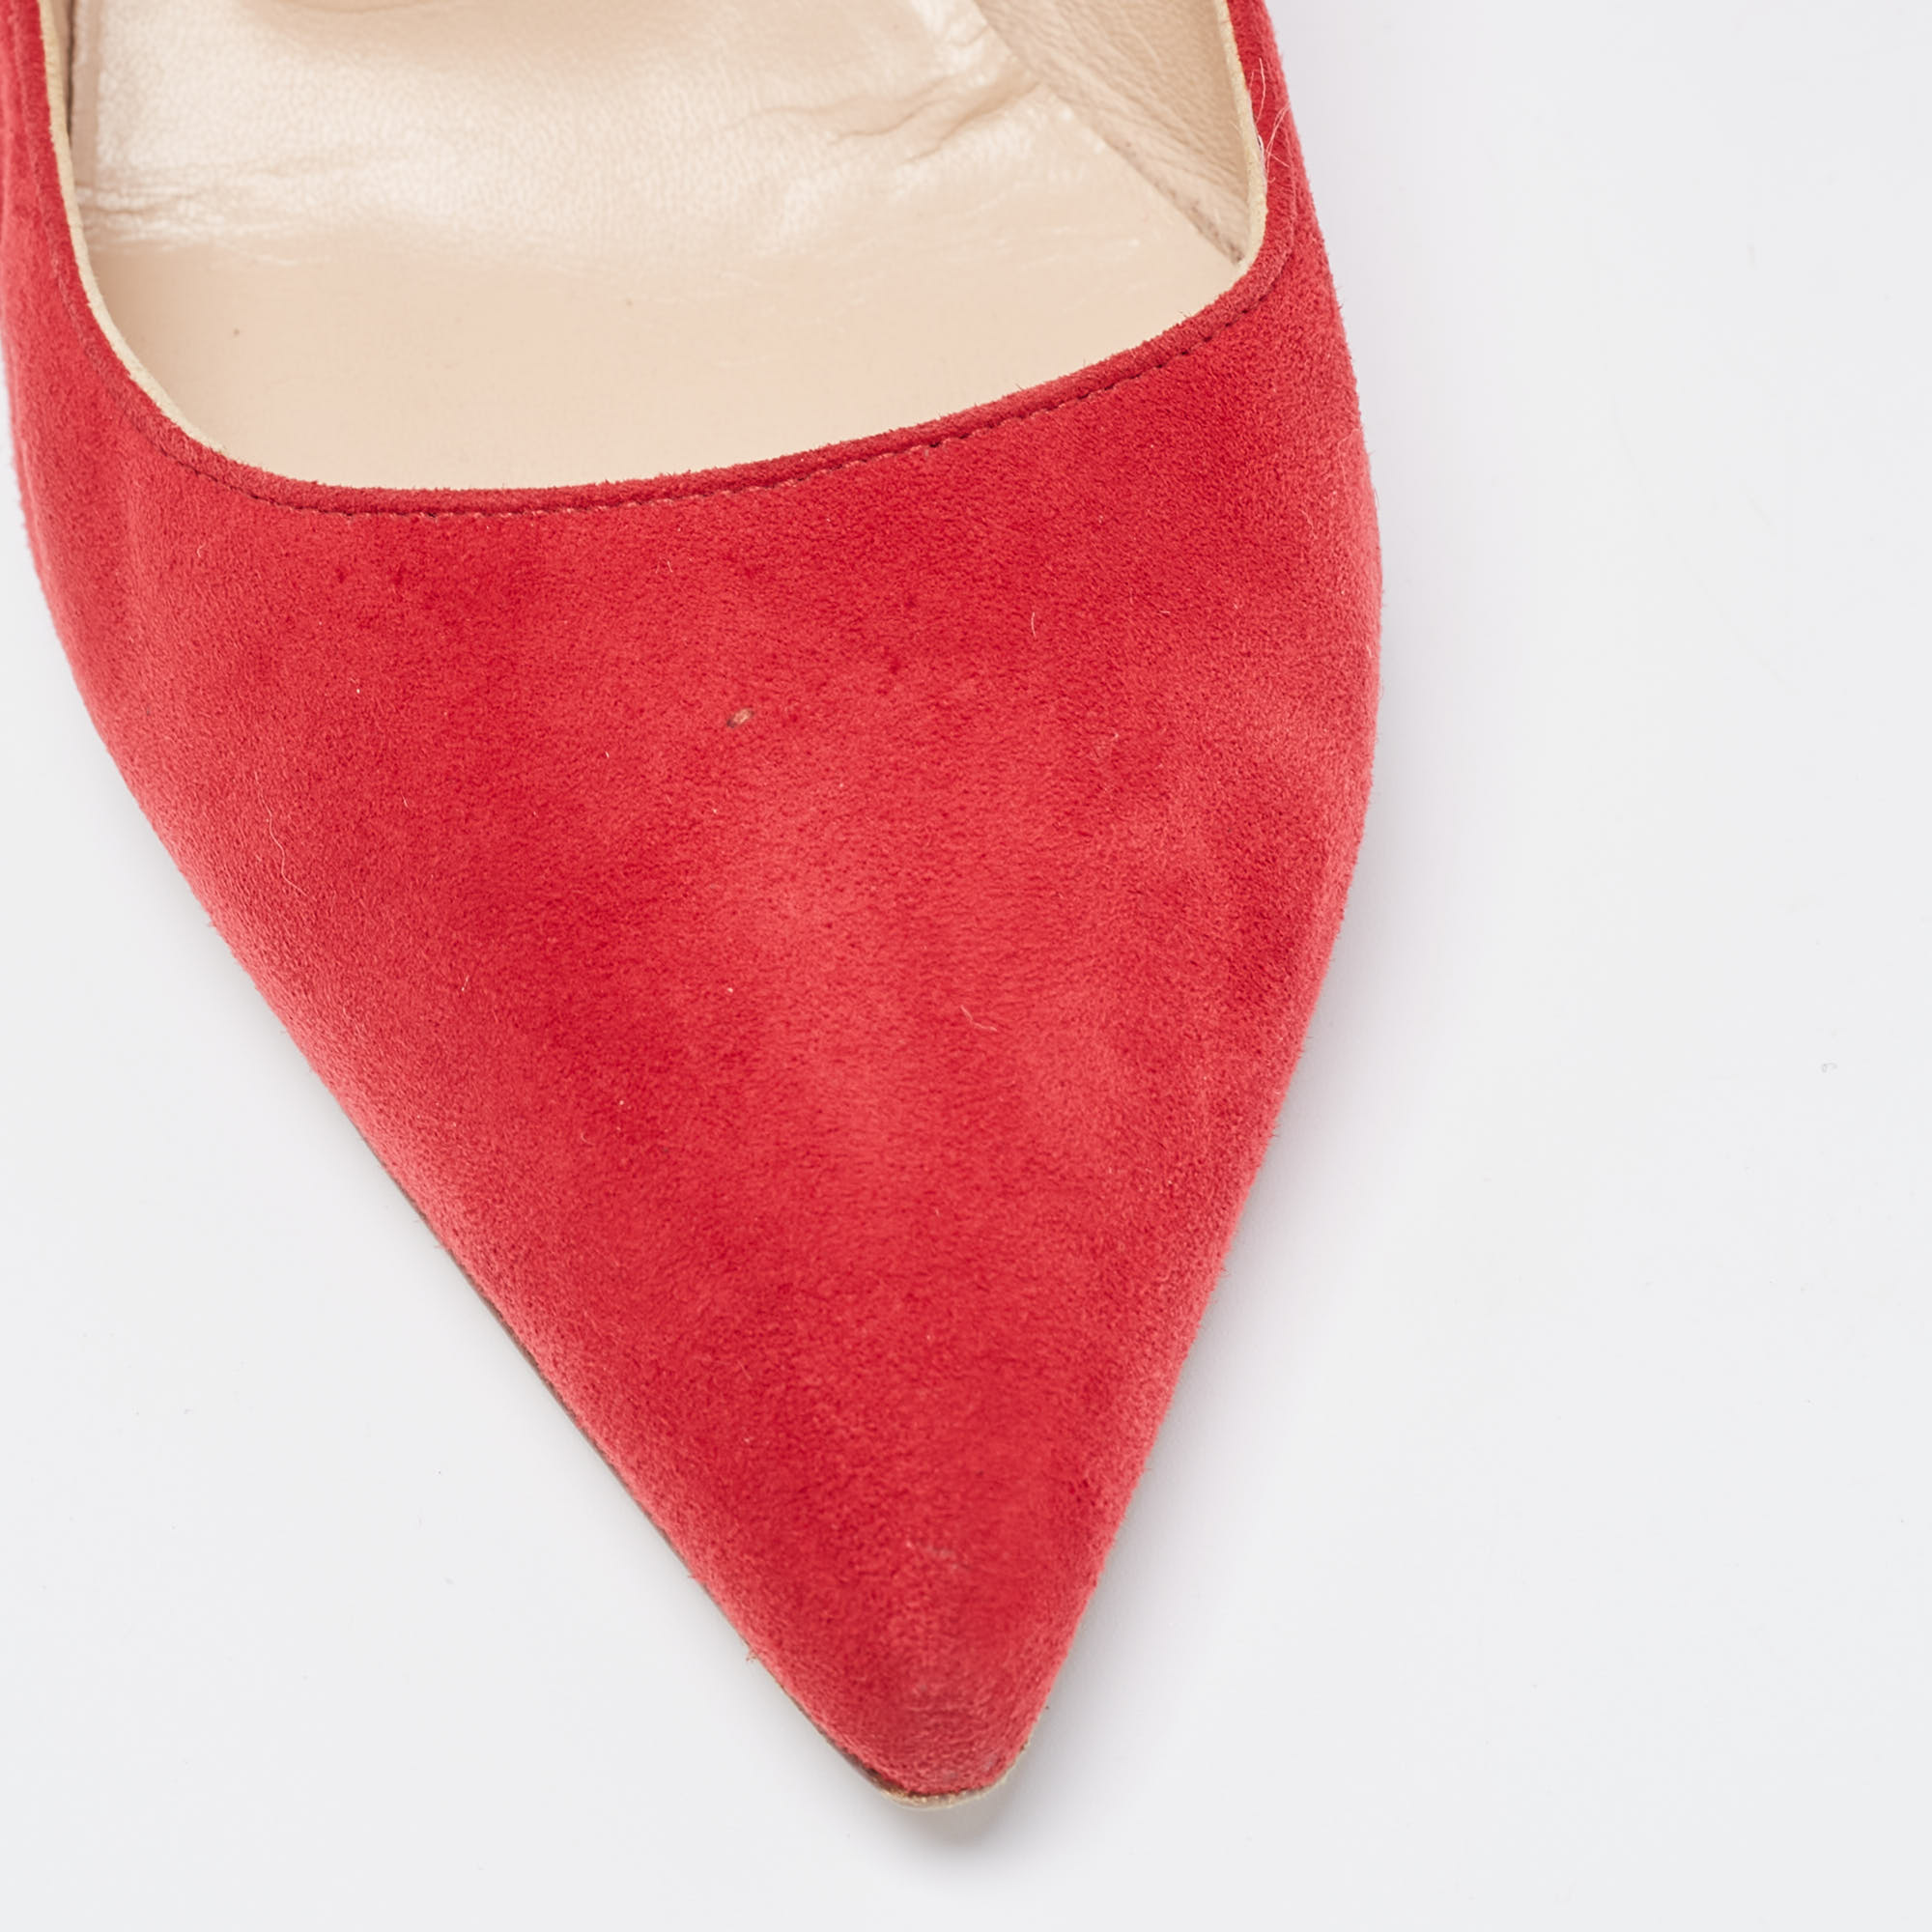 Manolo Blahnik Red Suede BB Pointed Toe Pumps Size 37.5